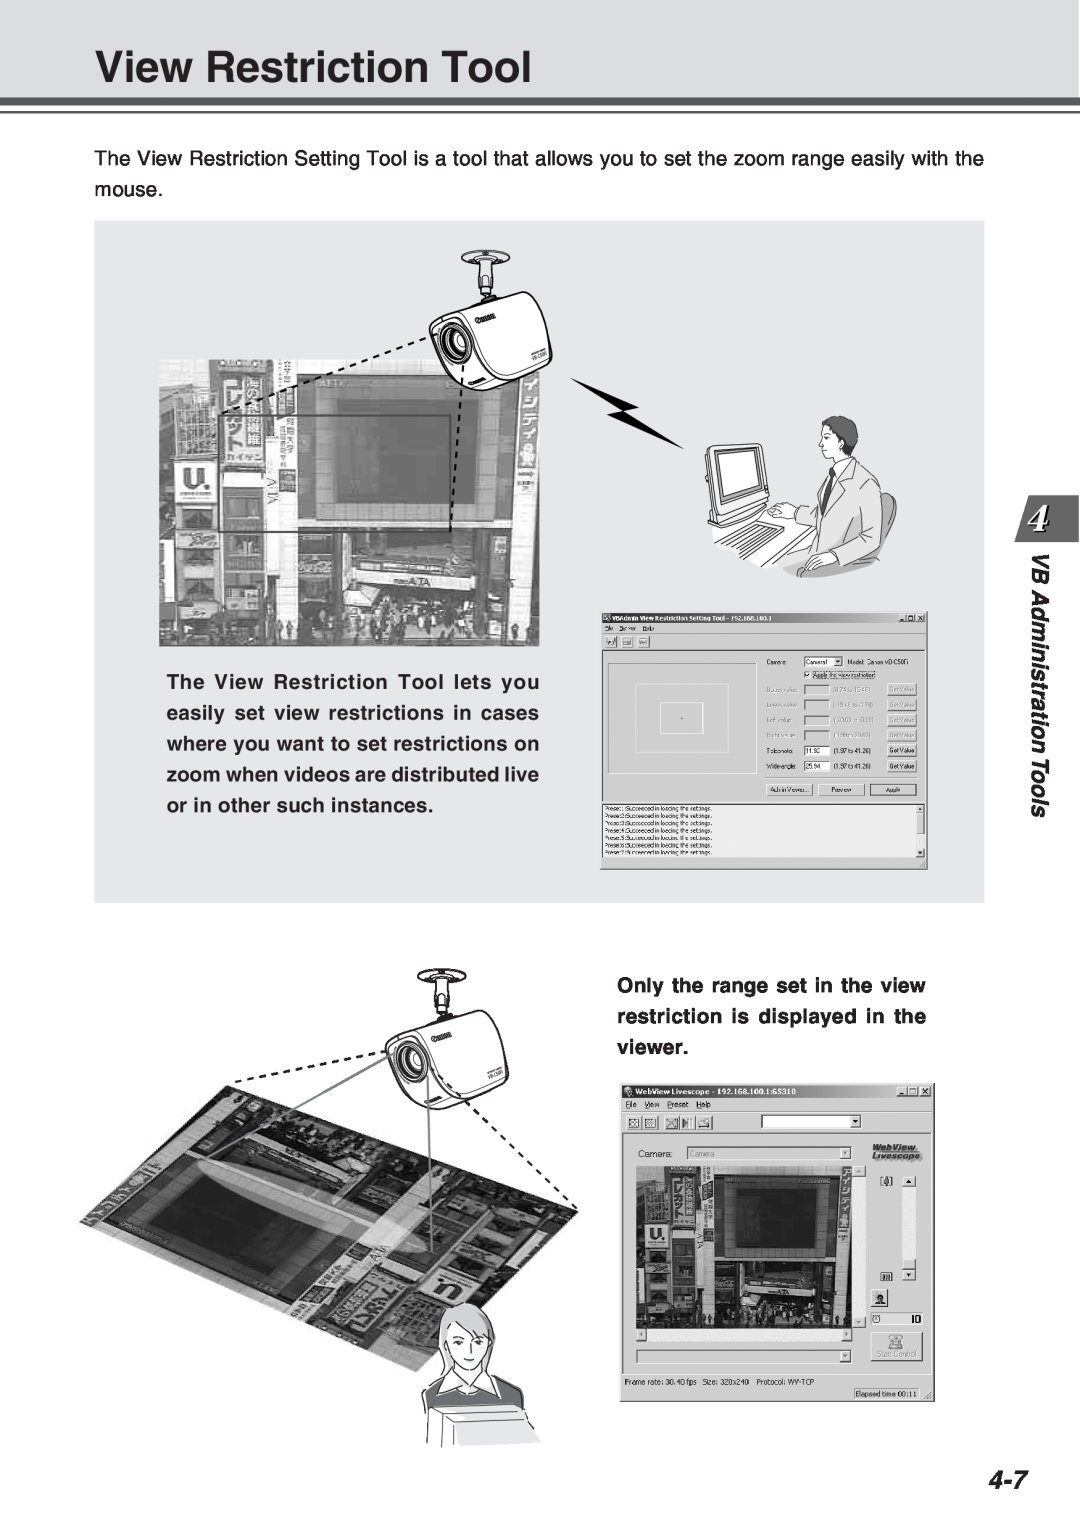 Canon Vb-C50fi user manual View Restriction Tool, VB Administration Tools, Only the range set in the view 